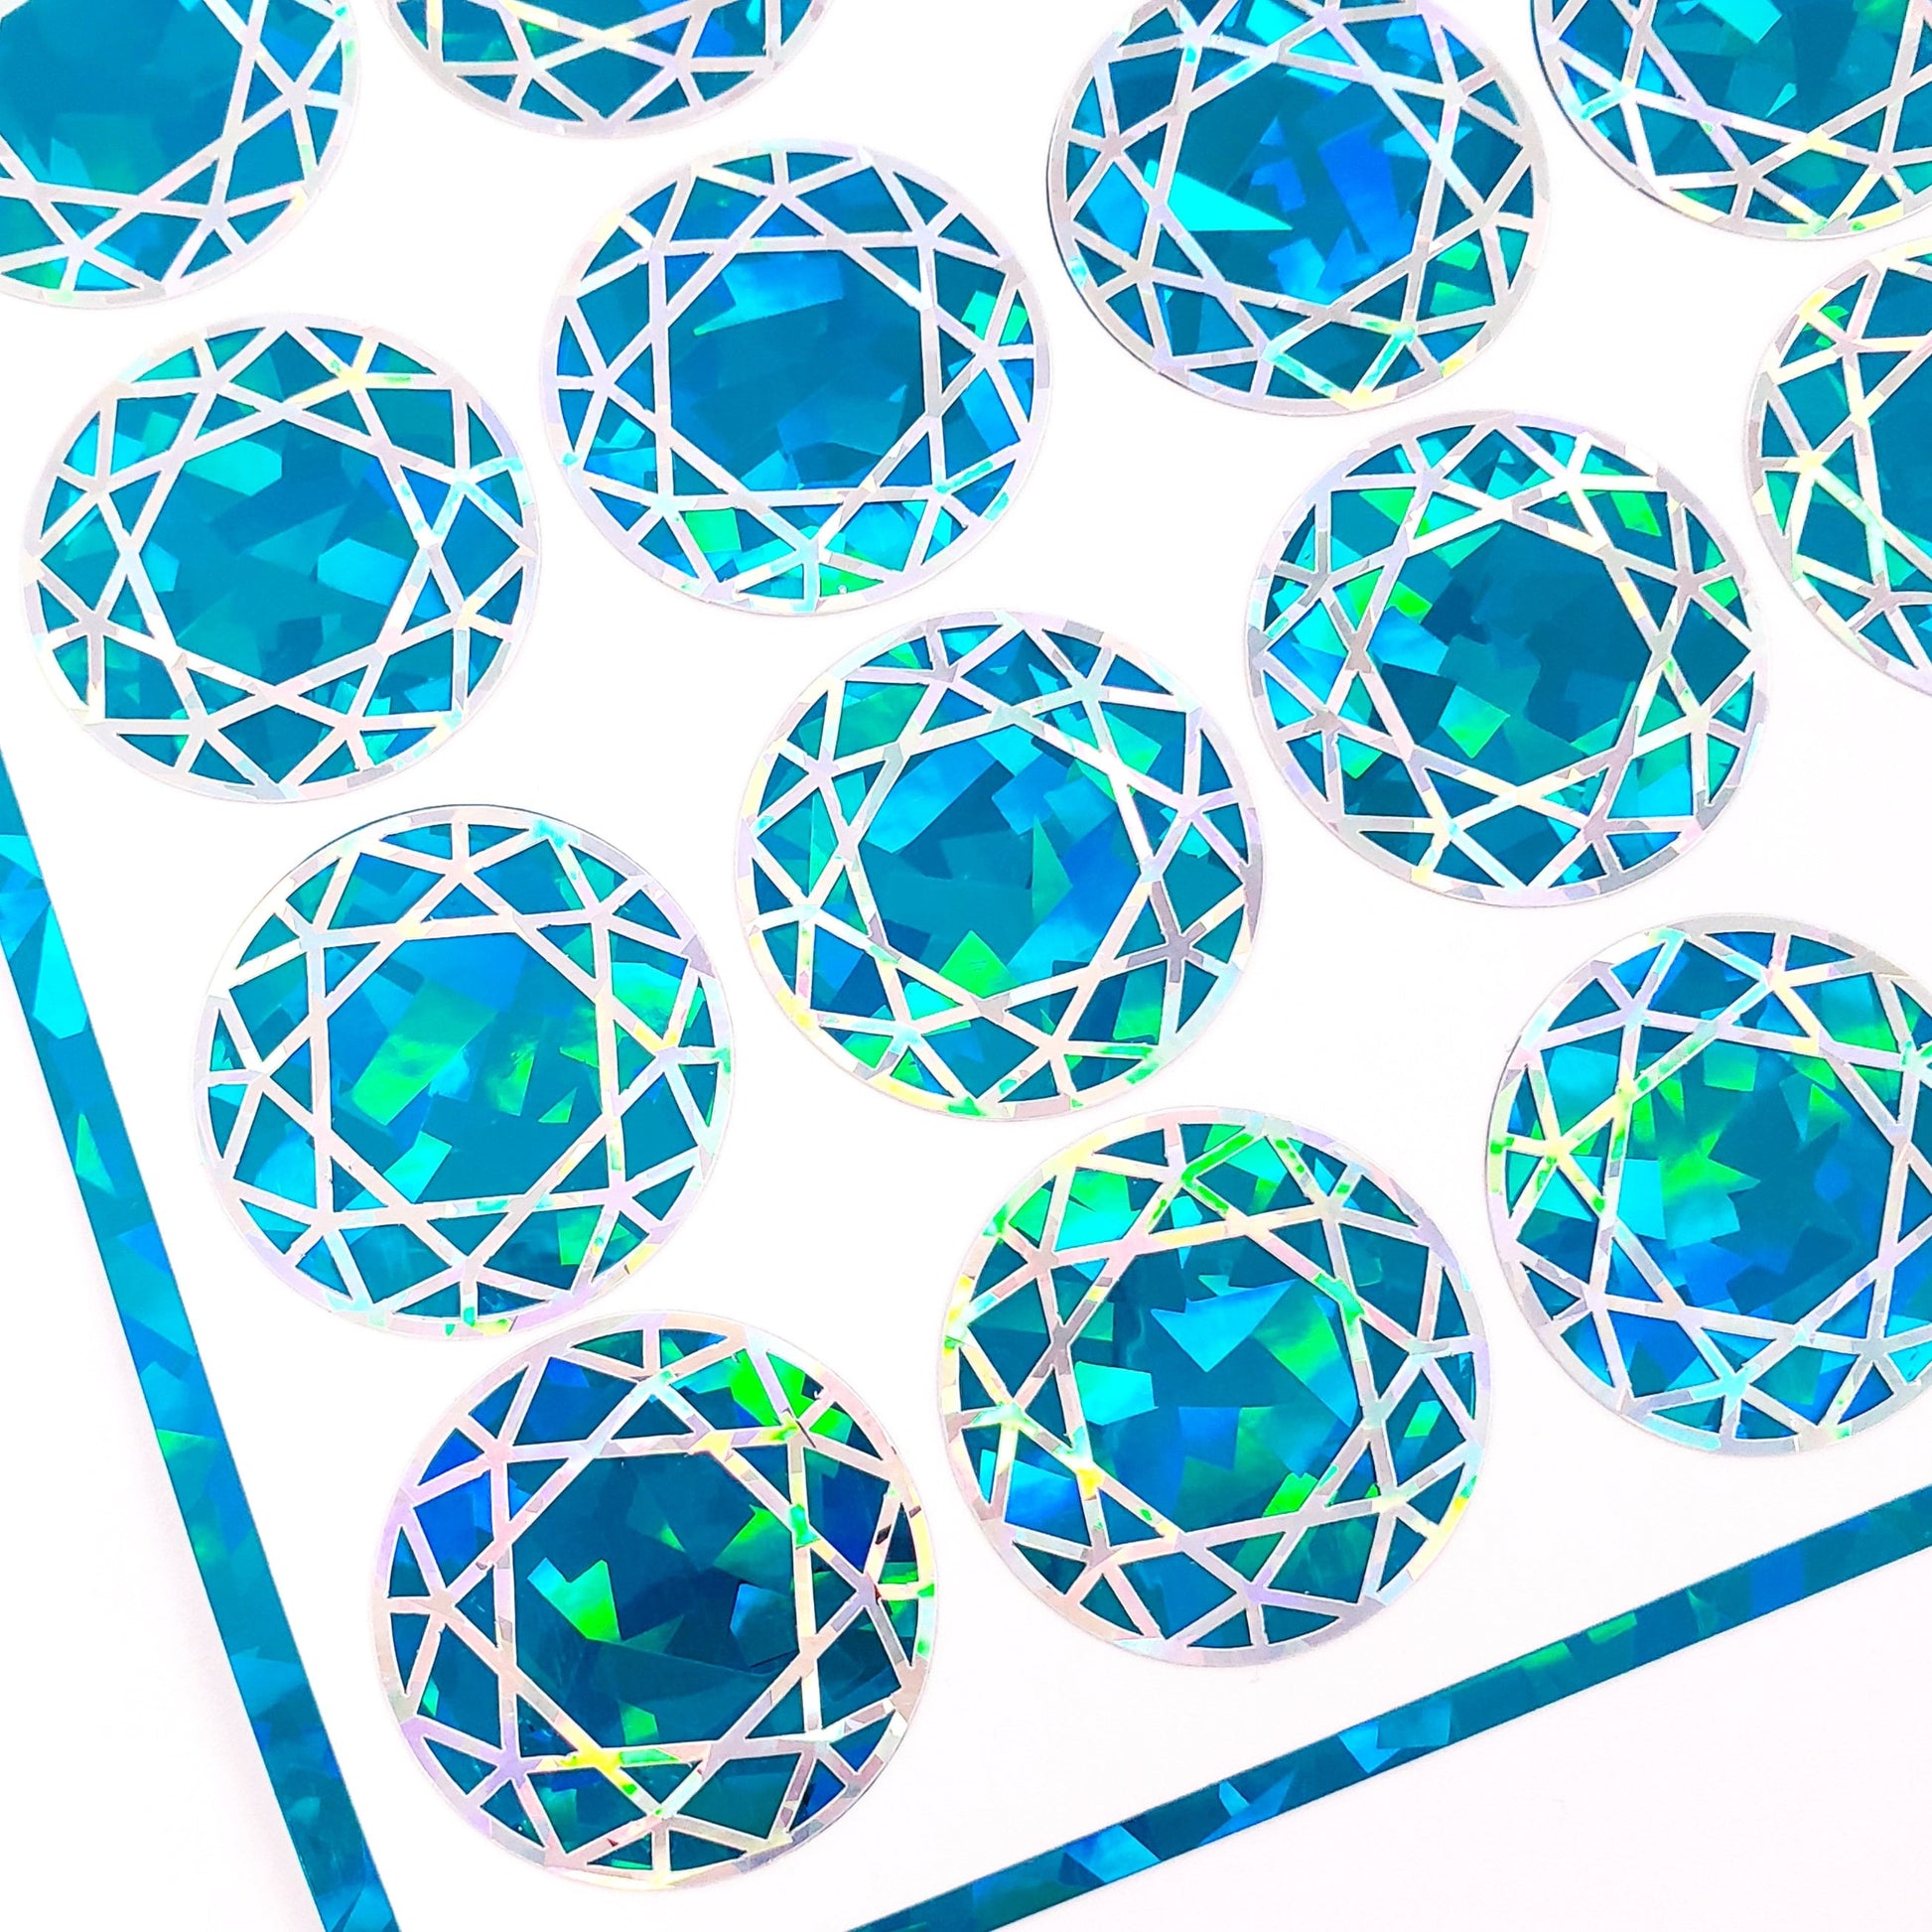 Aquamarine Diamond Sticker Bundle, set of 96 sparkly teal gemstone stickers for March birthday, Pisces zodiac gift, Free shipping.